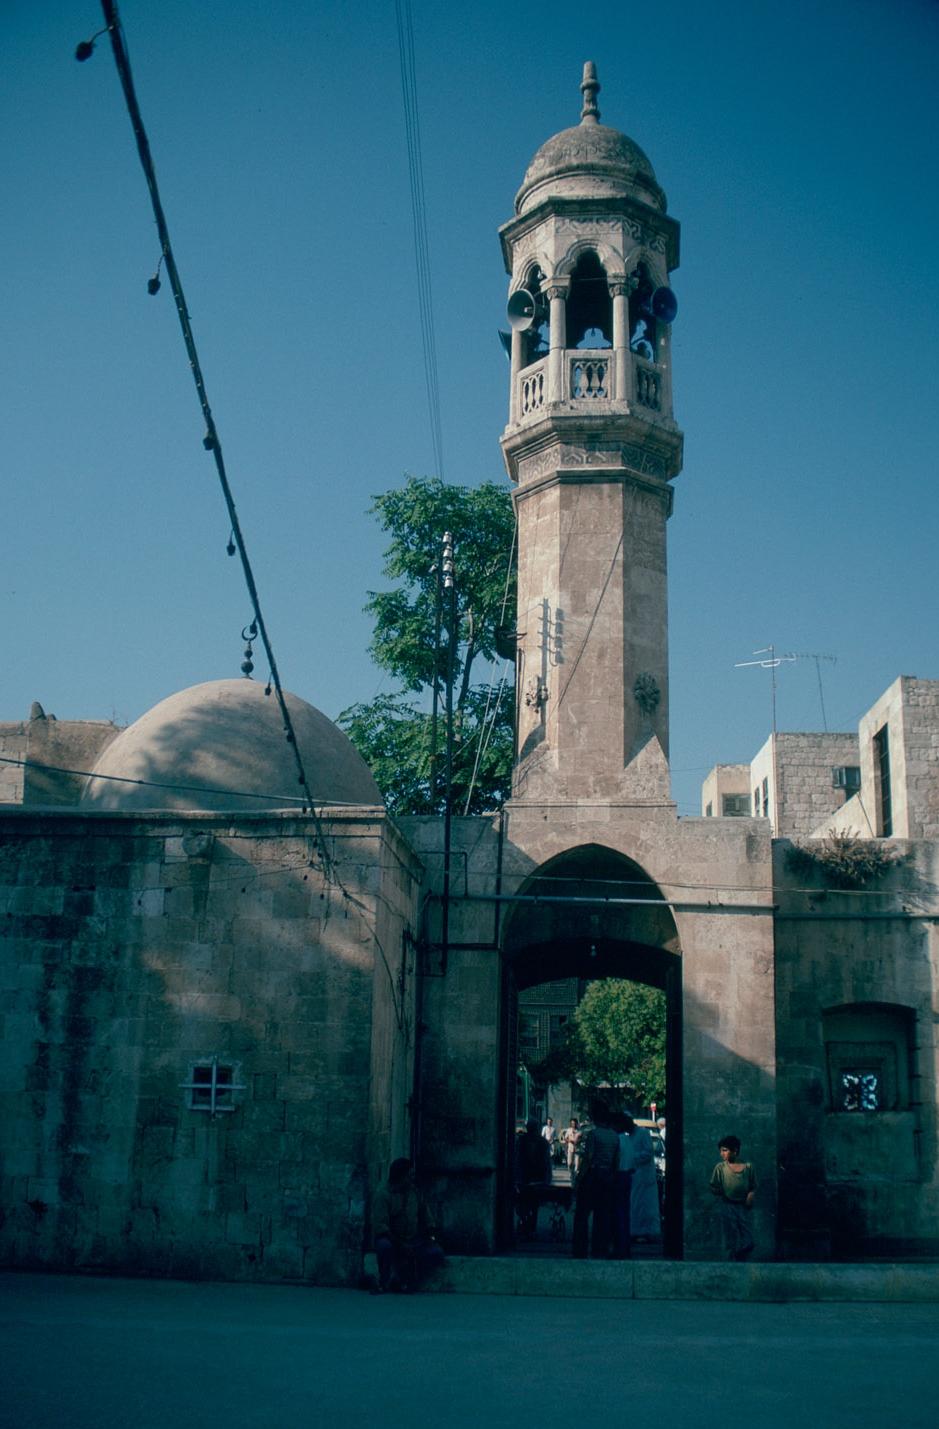 View of minaret above gate, courtyard view